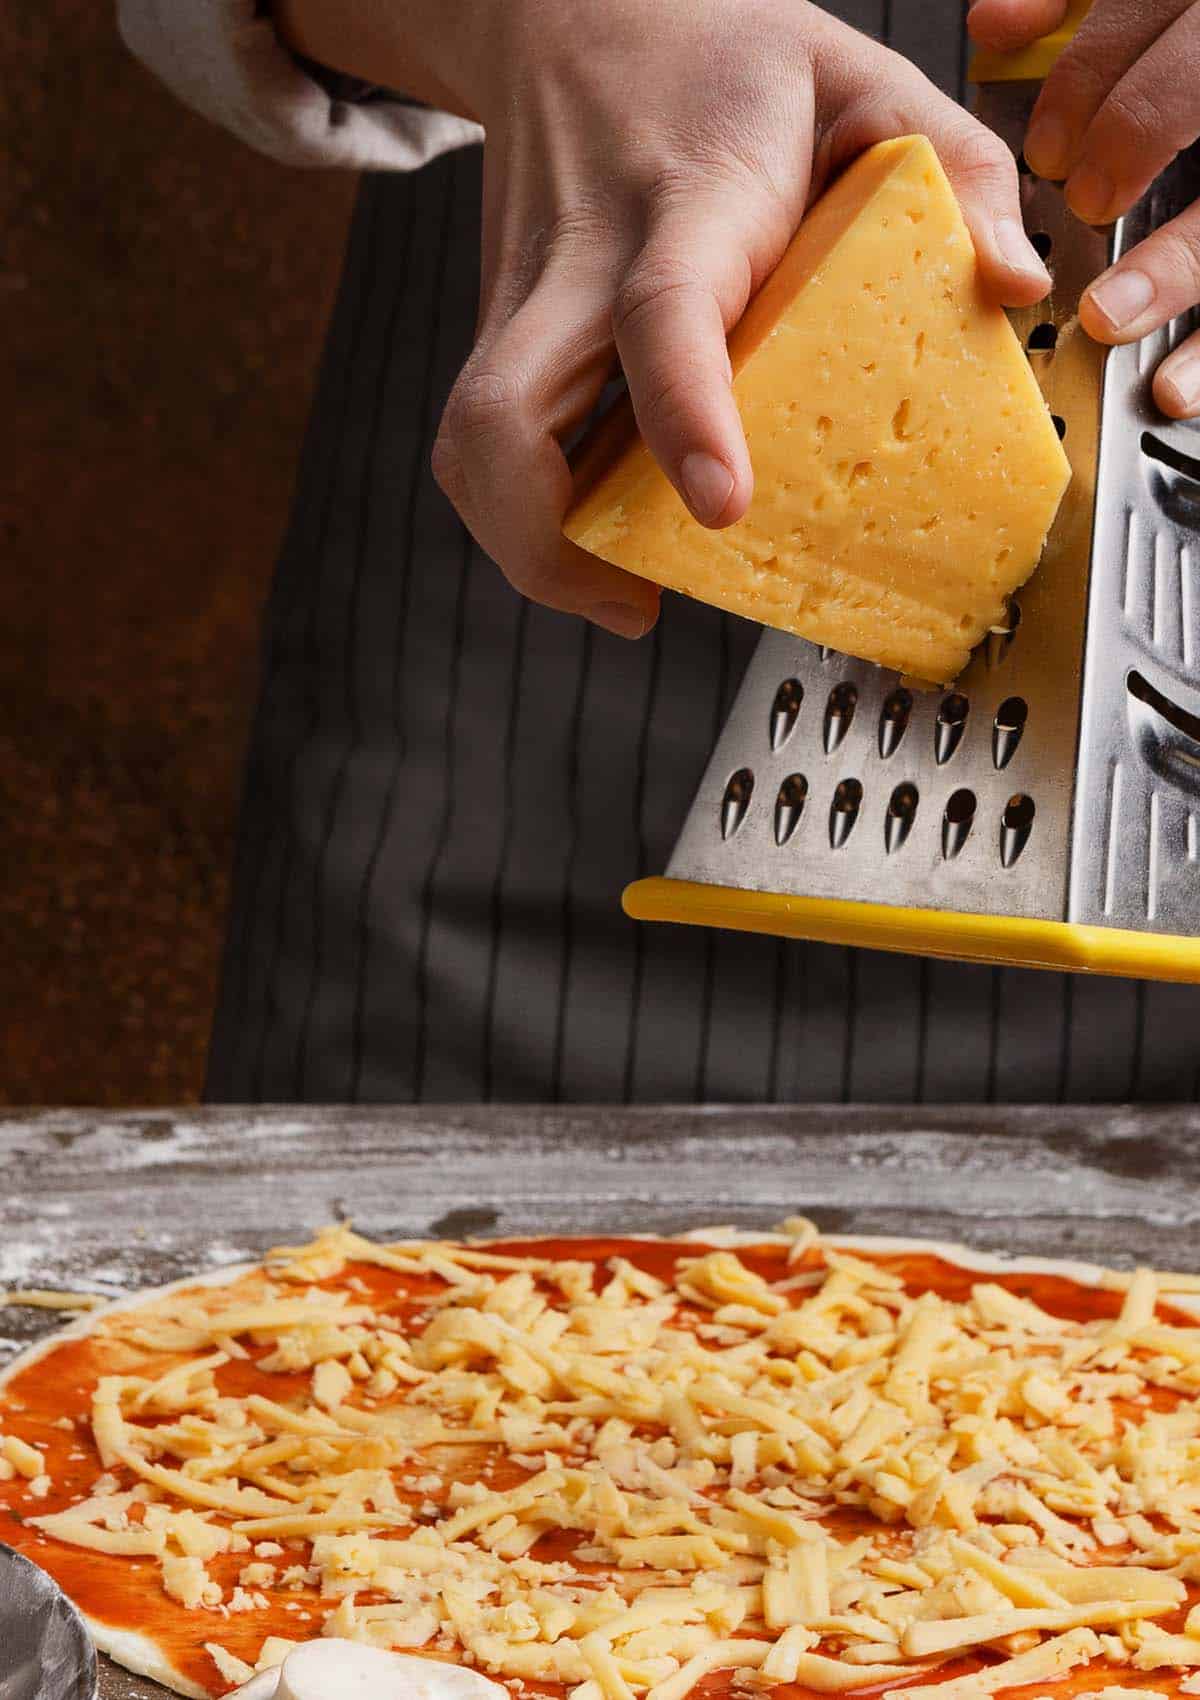 Learn the best tricks and tips for keeping shredded cheese fresh and clump-free. From storing it correctly to using the right tools and techniques, we've got you covered.